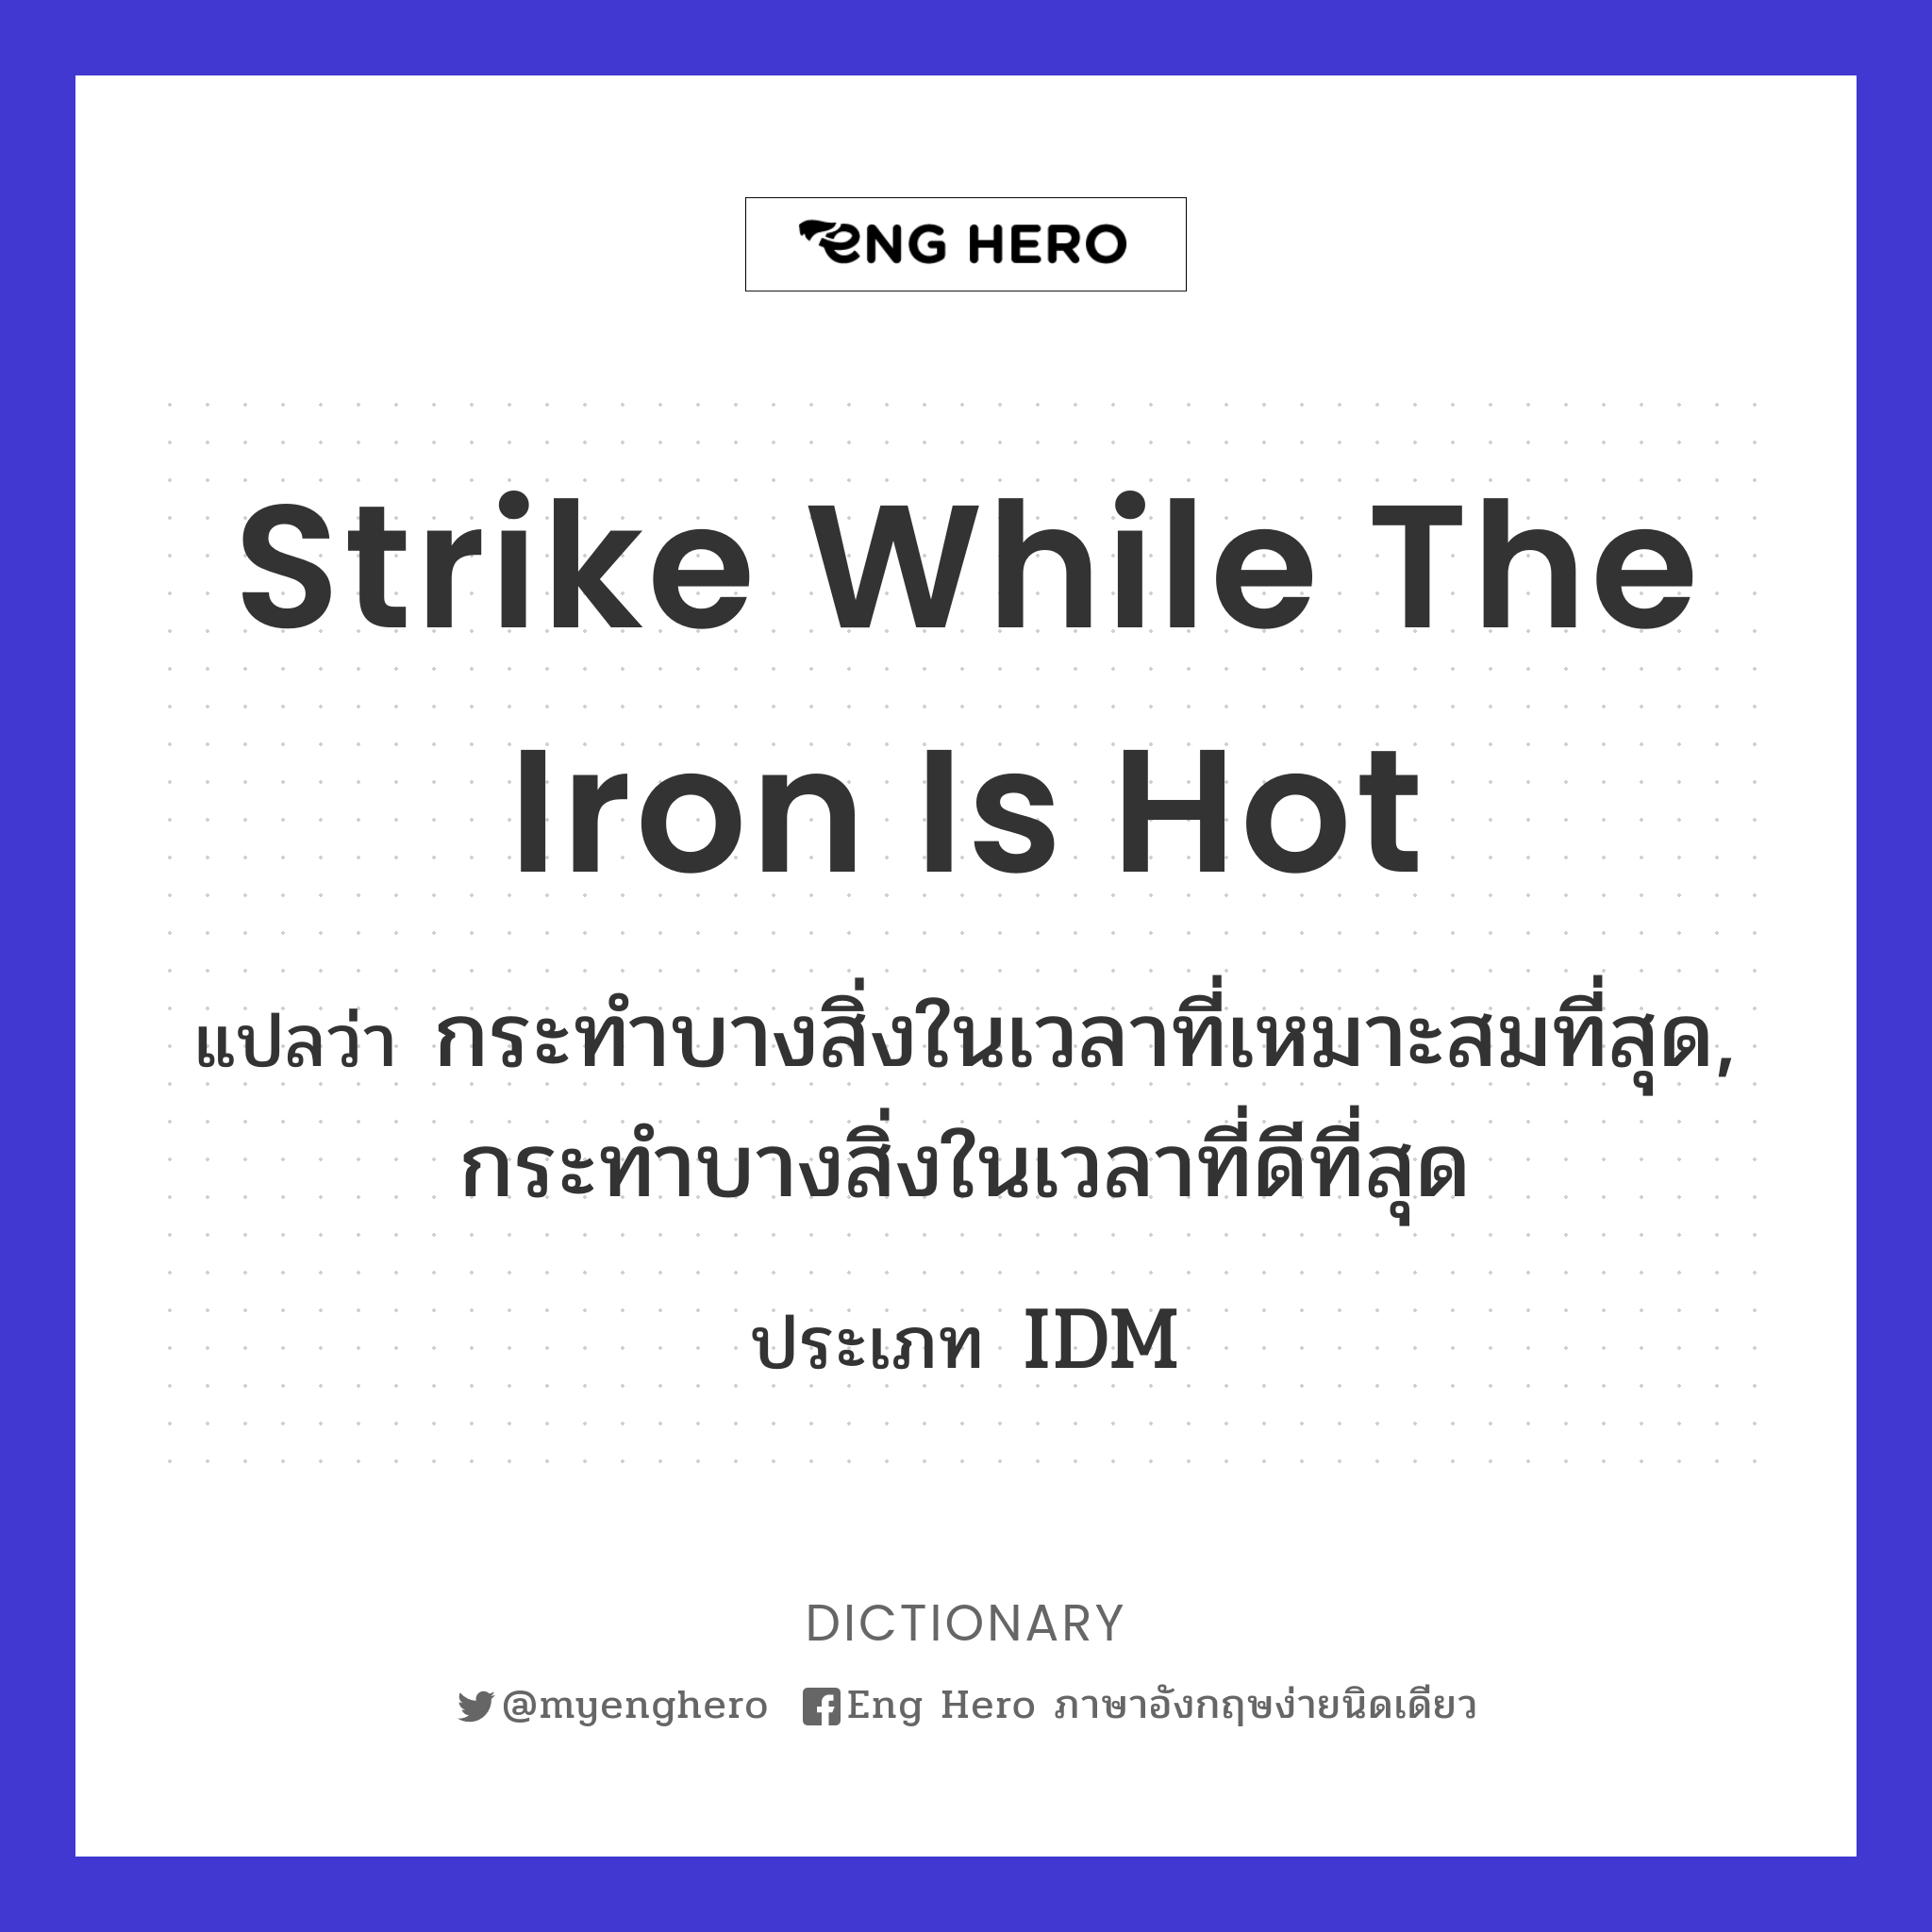 strike while the iron is hot